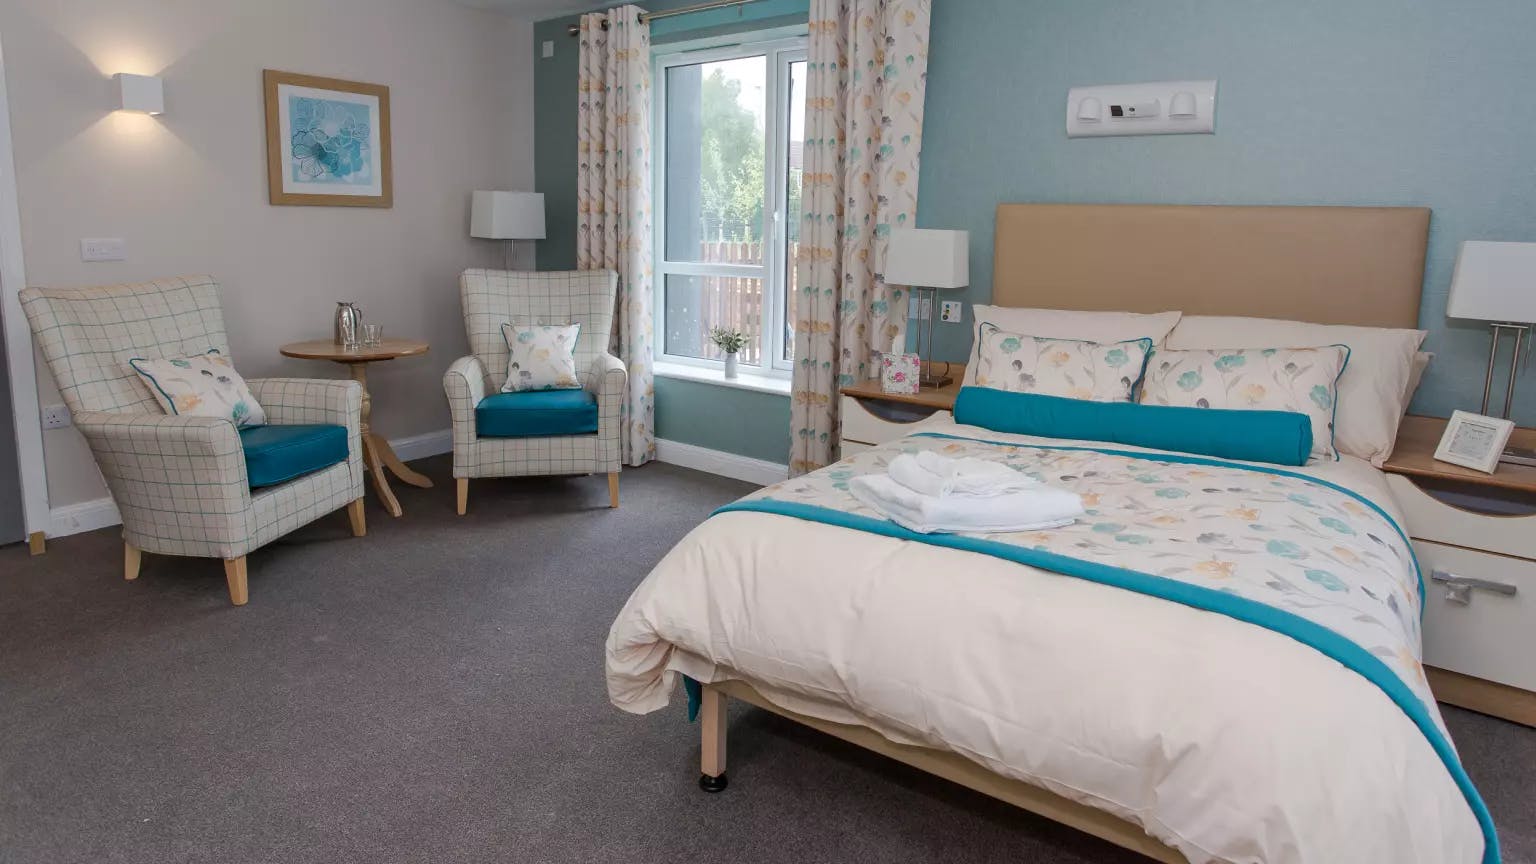 Bedroom of Anson Court care home in Welwyn Garden City, Hertfordshire